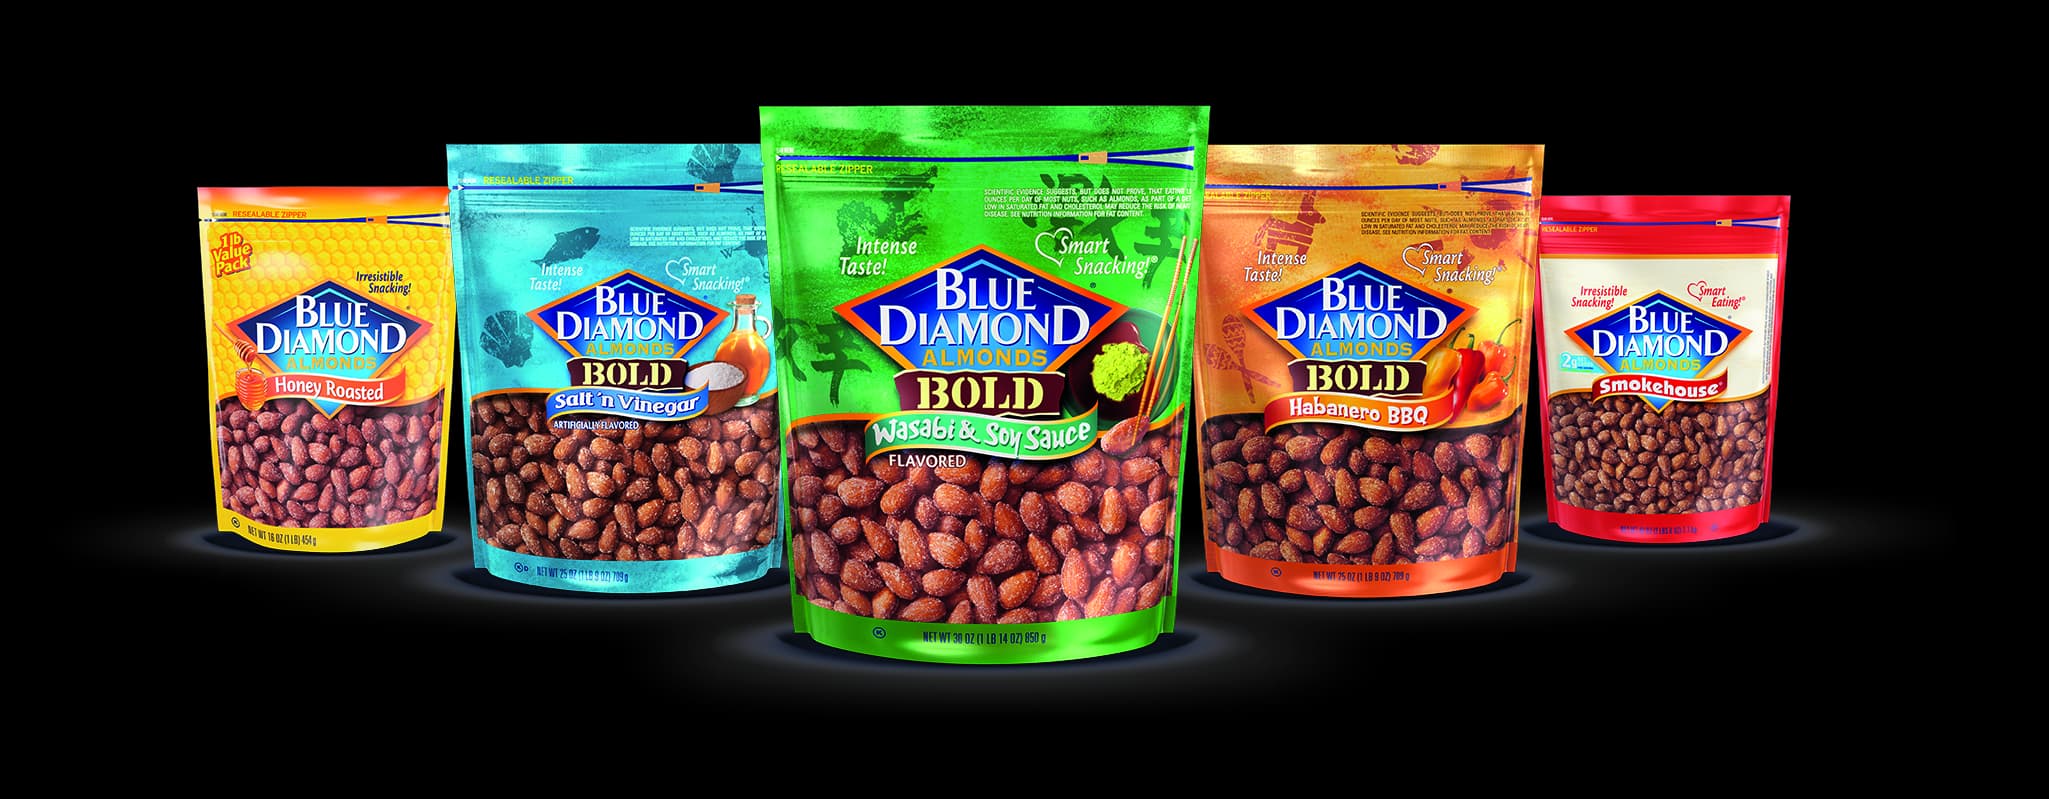 Bags of Blue Diamond Almonds® in Honey Roasted, Salt ‘n Vinegar, Wasabi & Soy Sauce, Habanero BBQ, and Smokehouse Flavors.